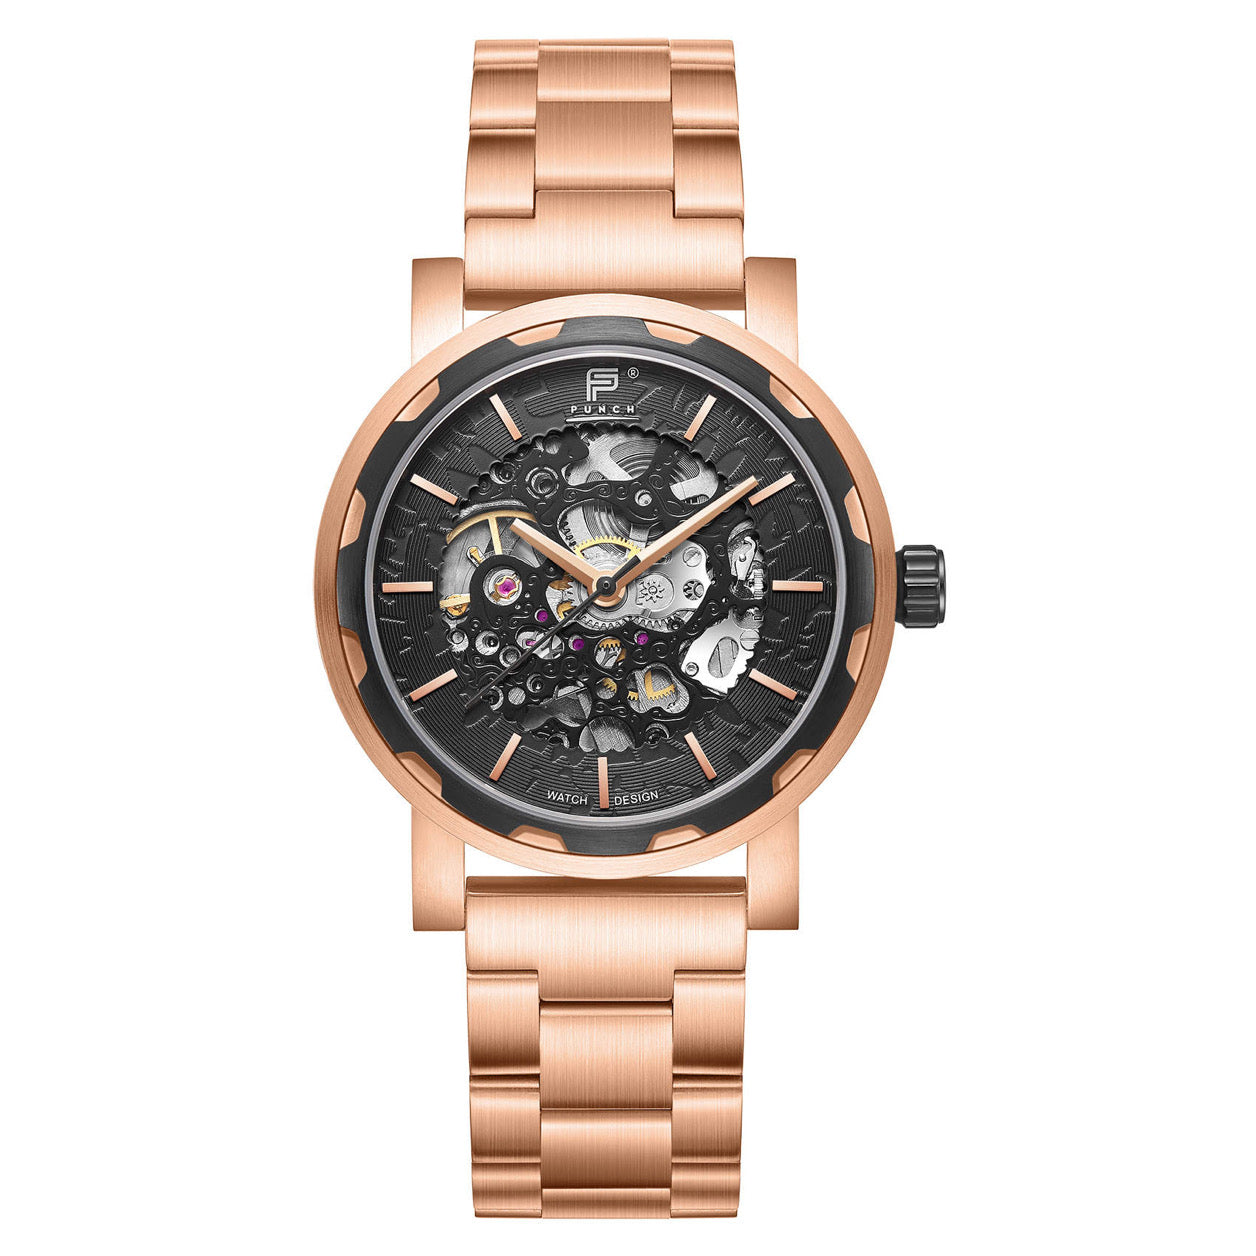 Rose Gold Skeleton Automatic Men's Wrist Watch - Front View